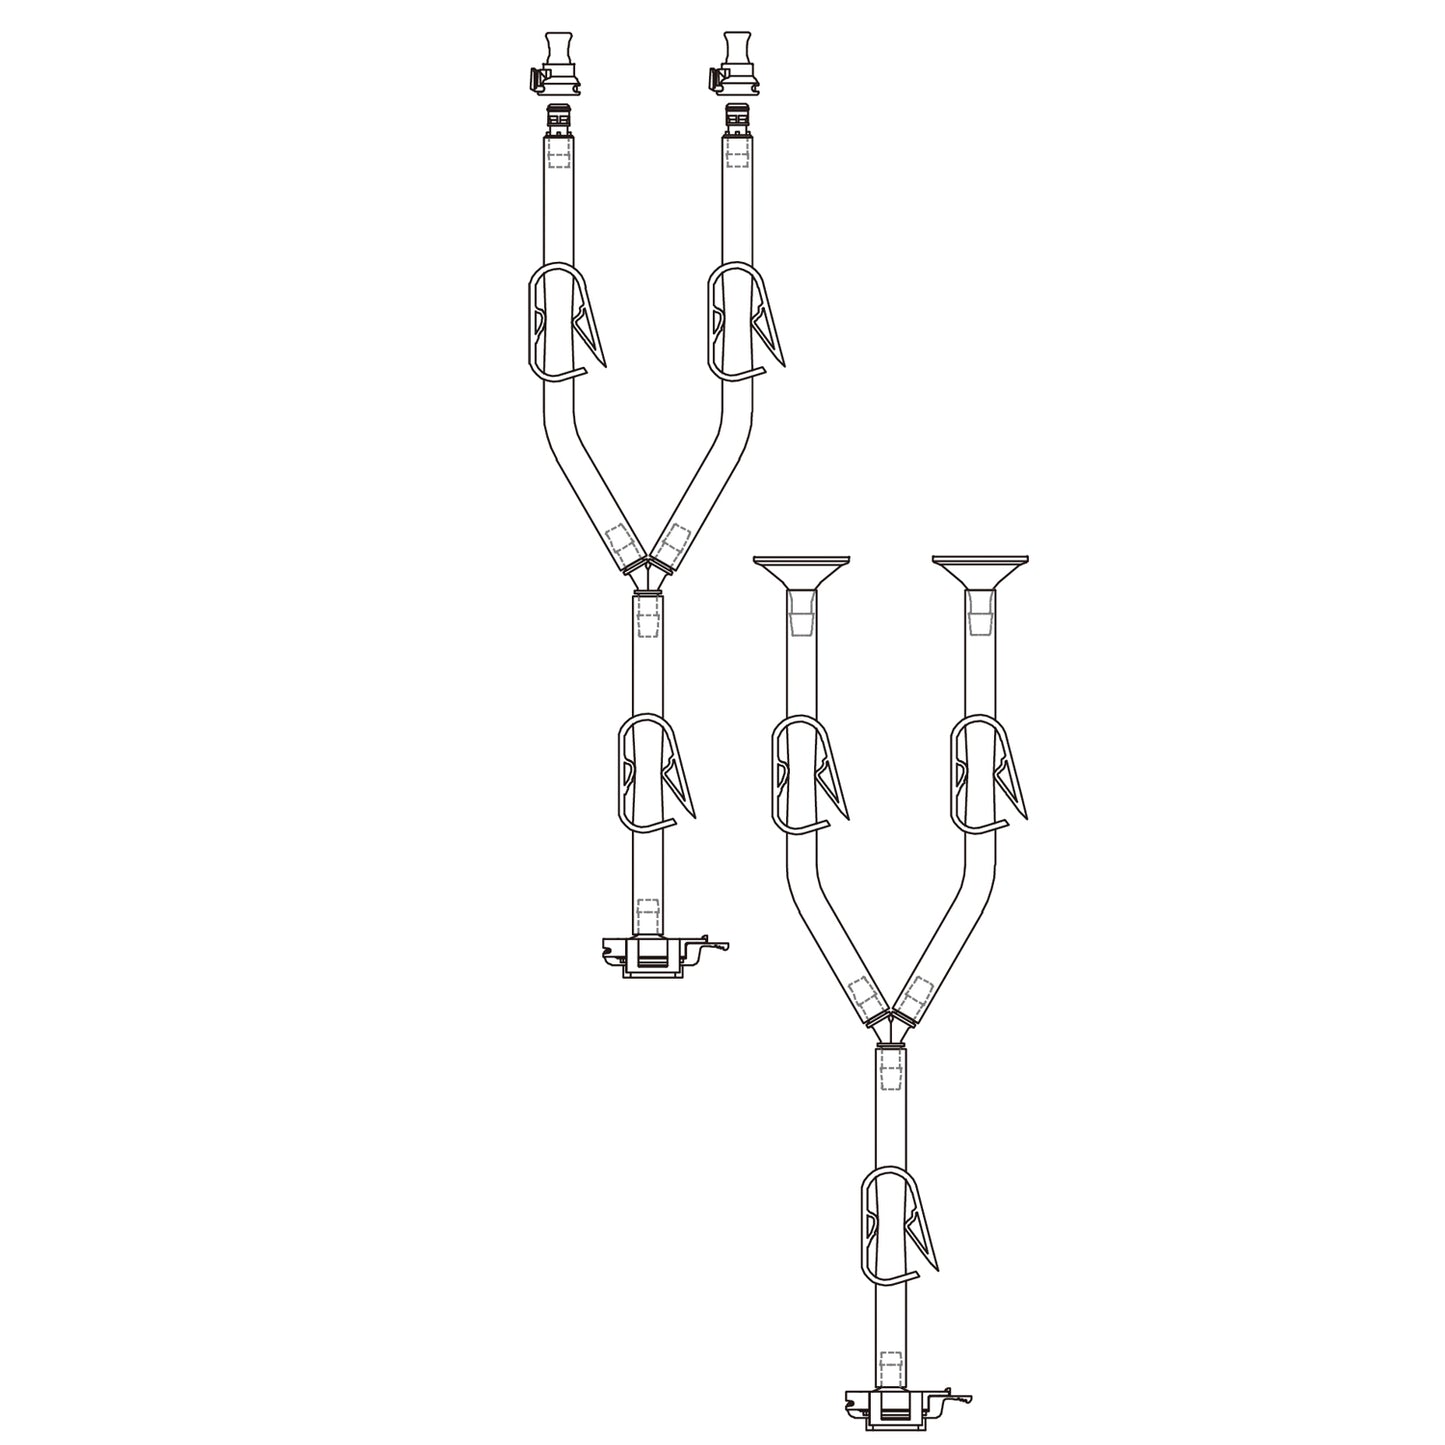 COBETTER Single-Use Y-line Transfer Sets with Lifemeta® STT Tubing TC Connectors